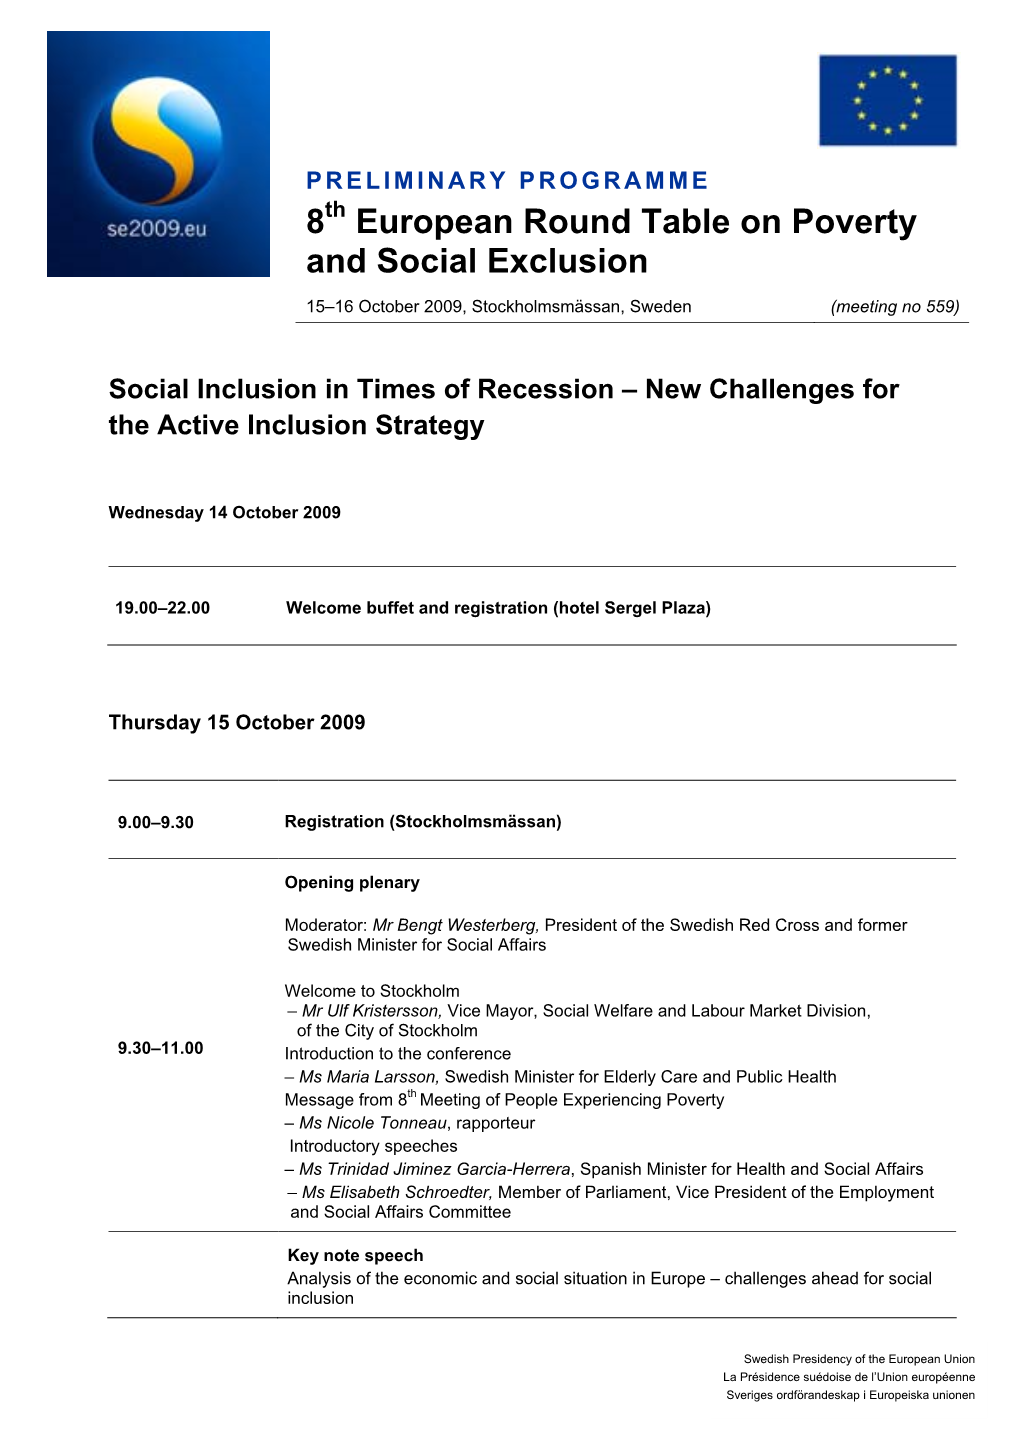 8 European Round Table on Poverty and Social Exclusion